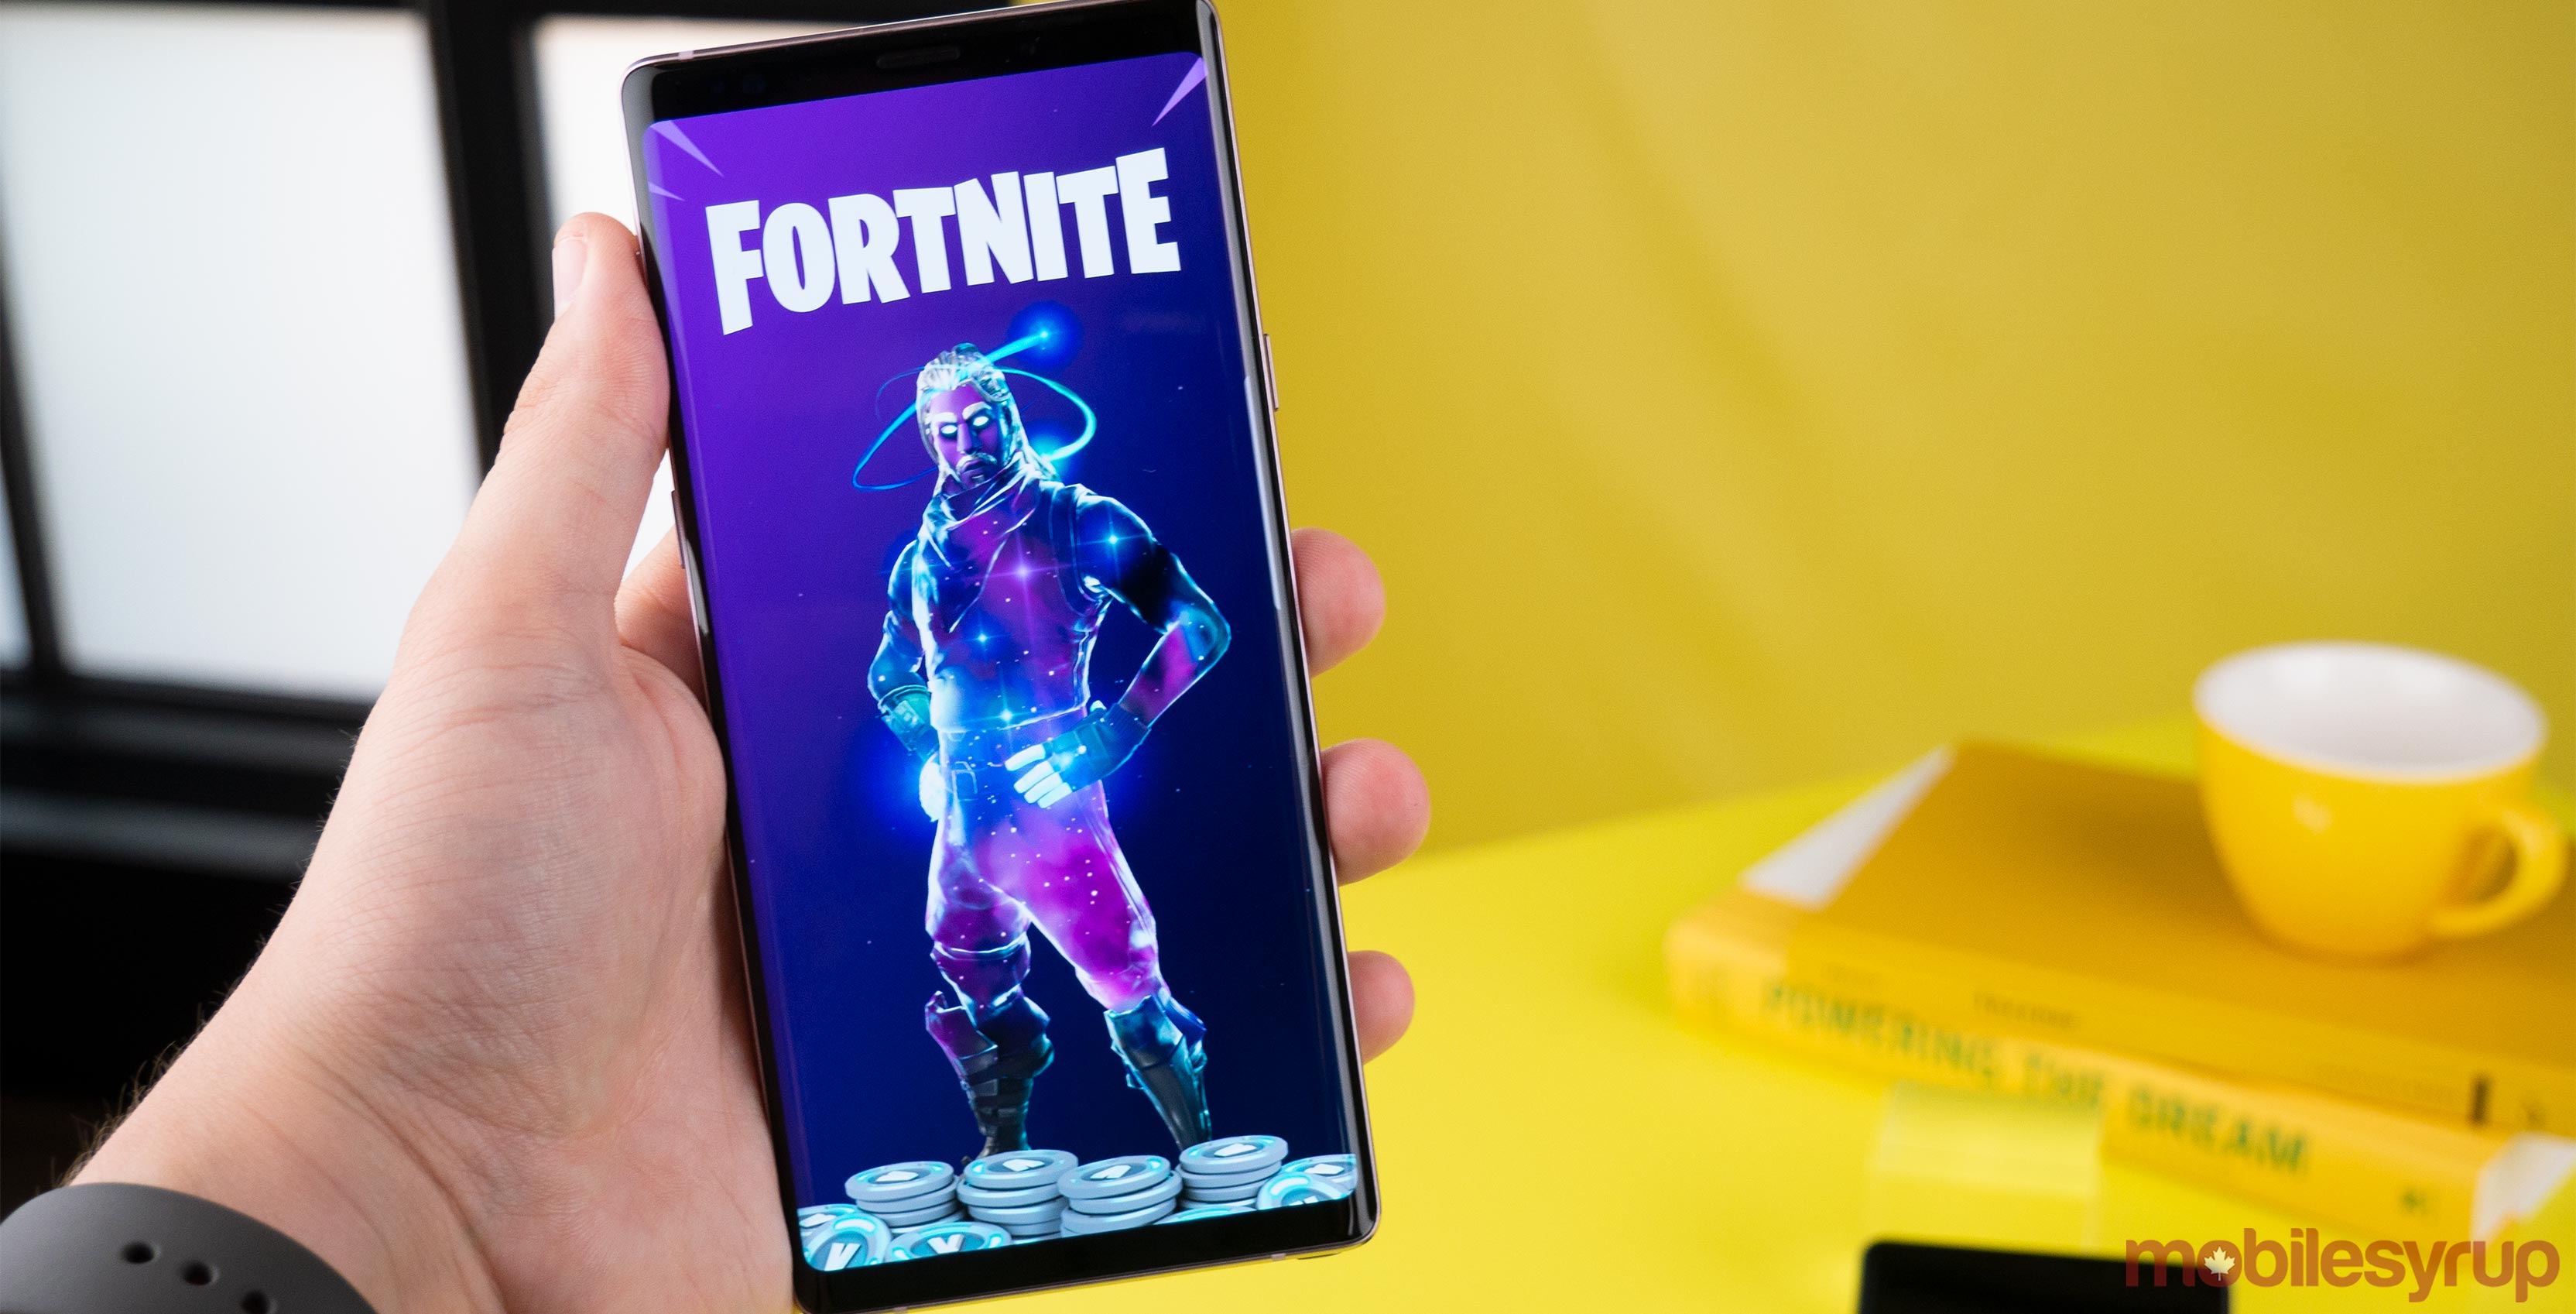 fortnite s long awaited android version has finally launched on samsung mobile devices in beta samsung announced at its unpacked note 9 event in new york - google play beta tester fortnite